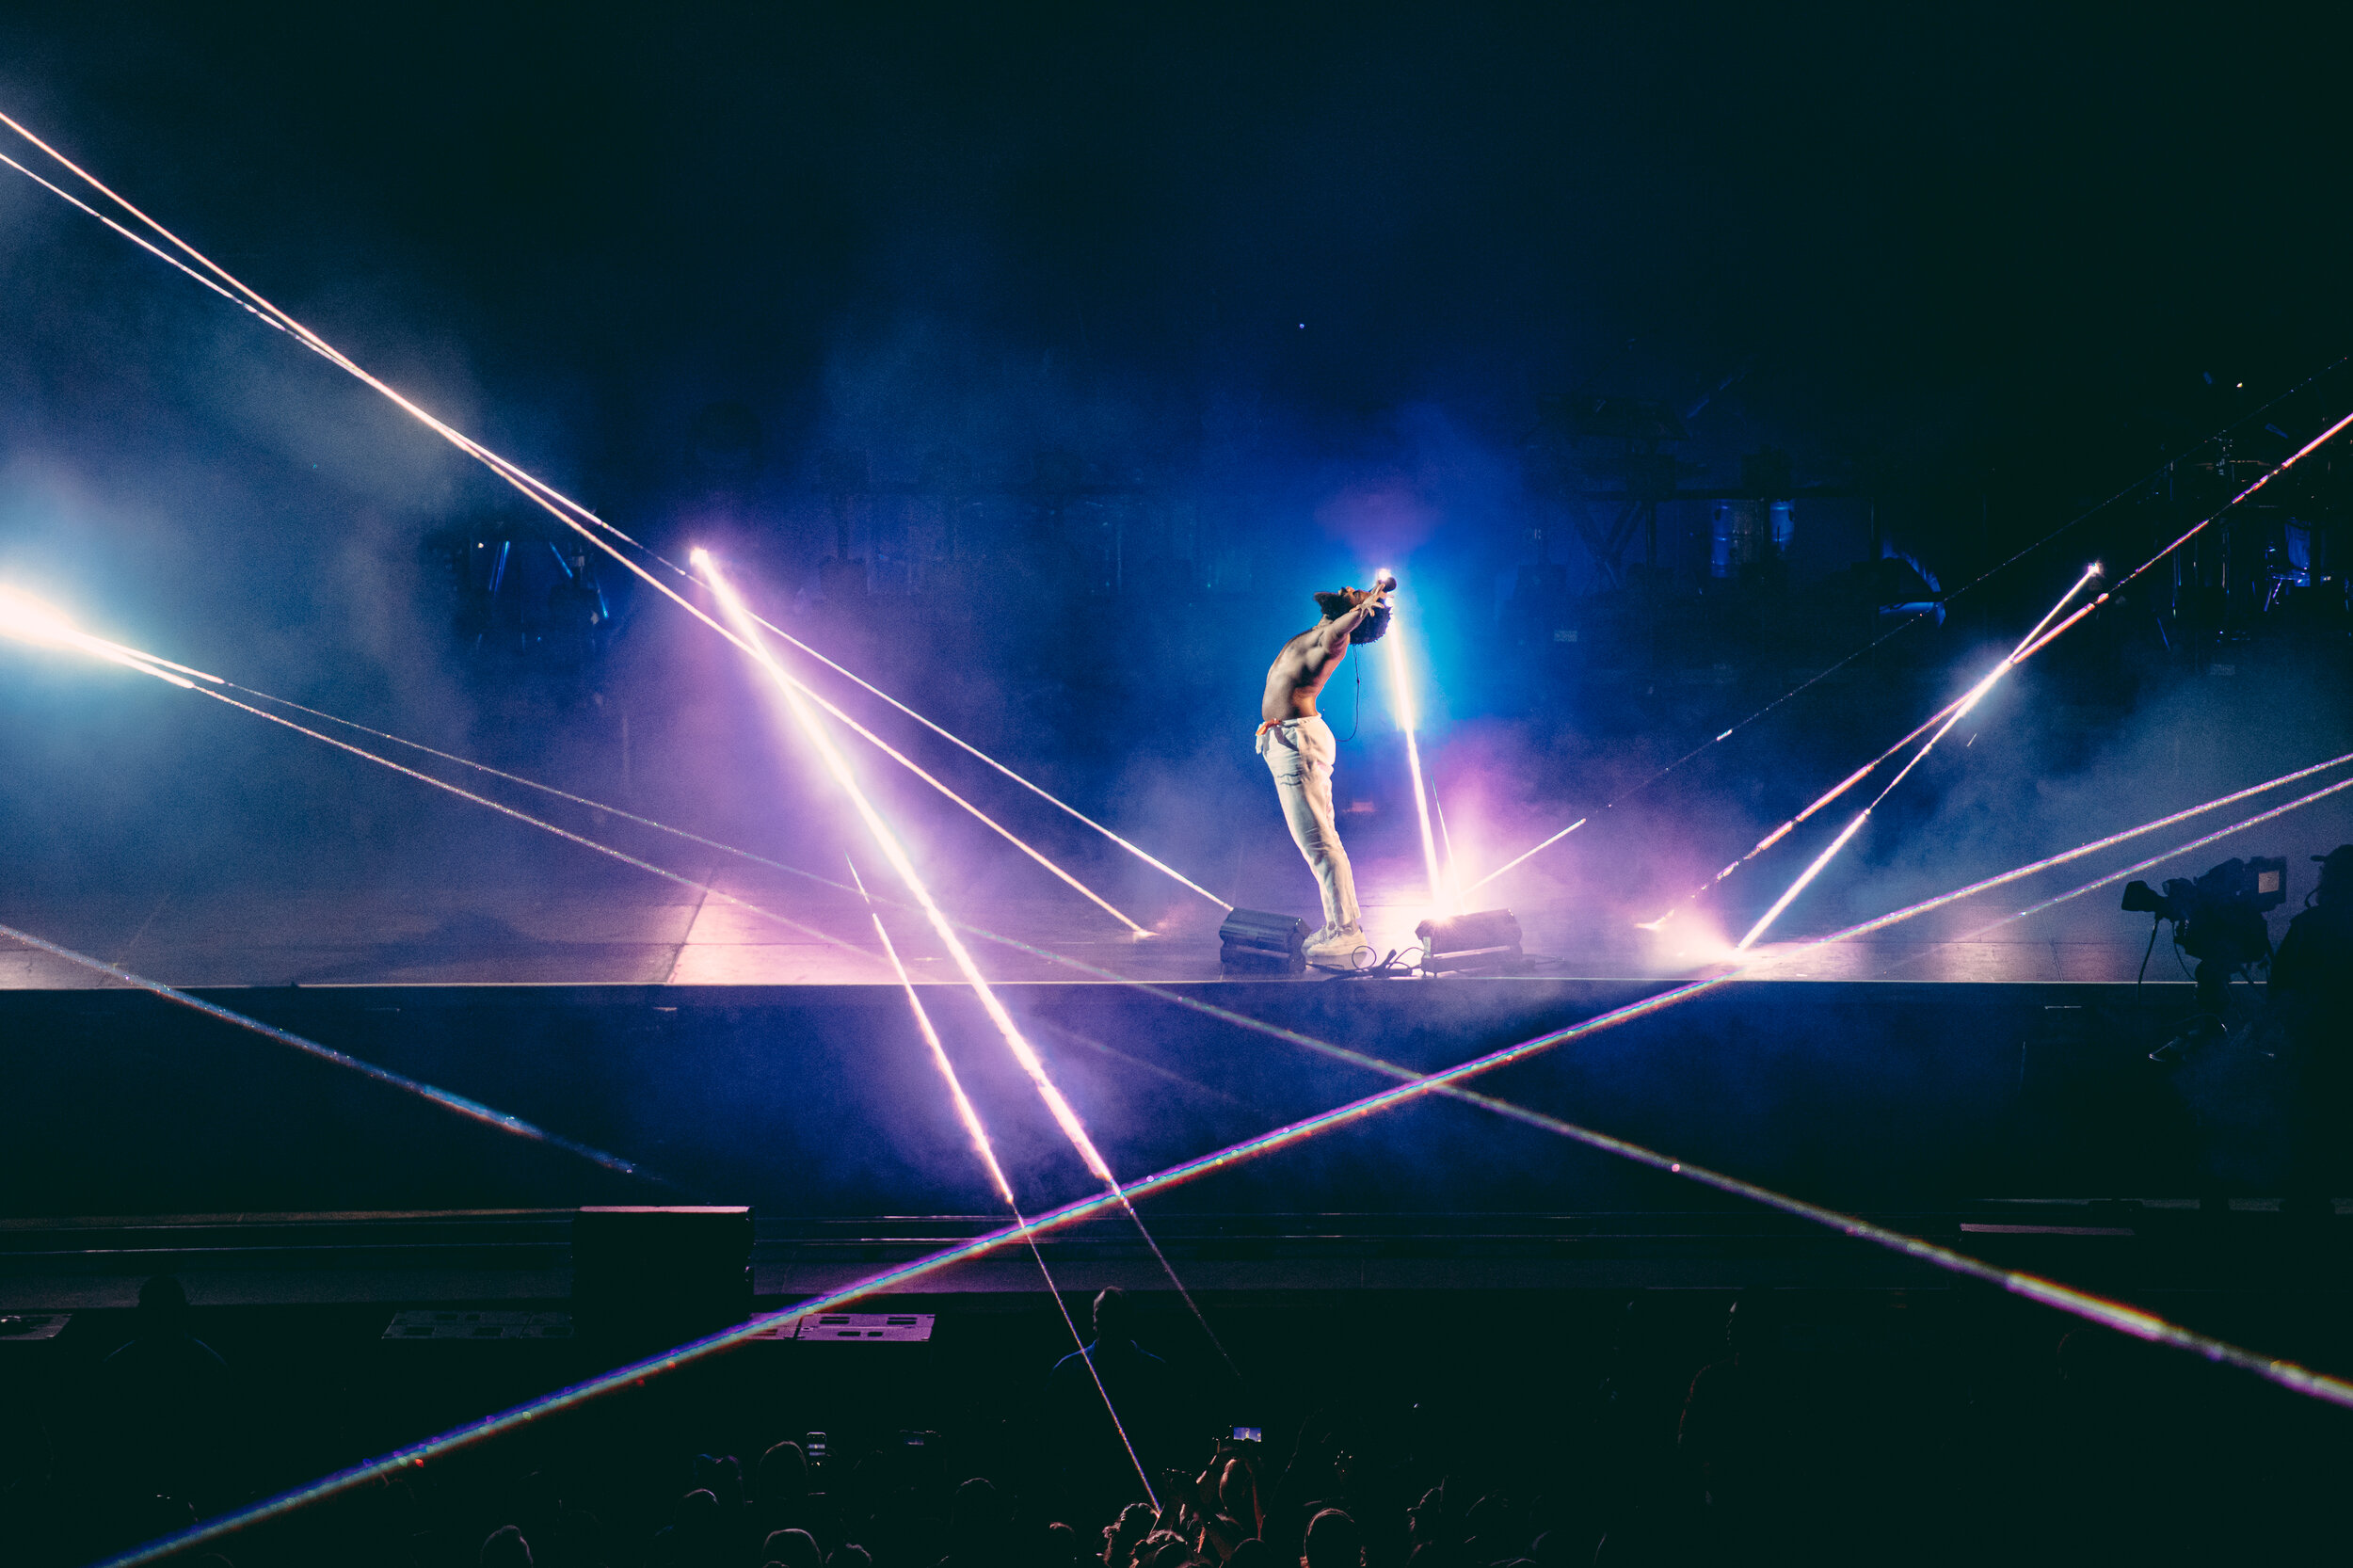 Childish Gambino  by Charles Reagan Hackleman for ACL Fest W2 2019 DSC_3003.JPG